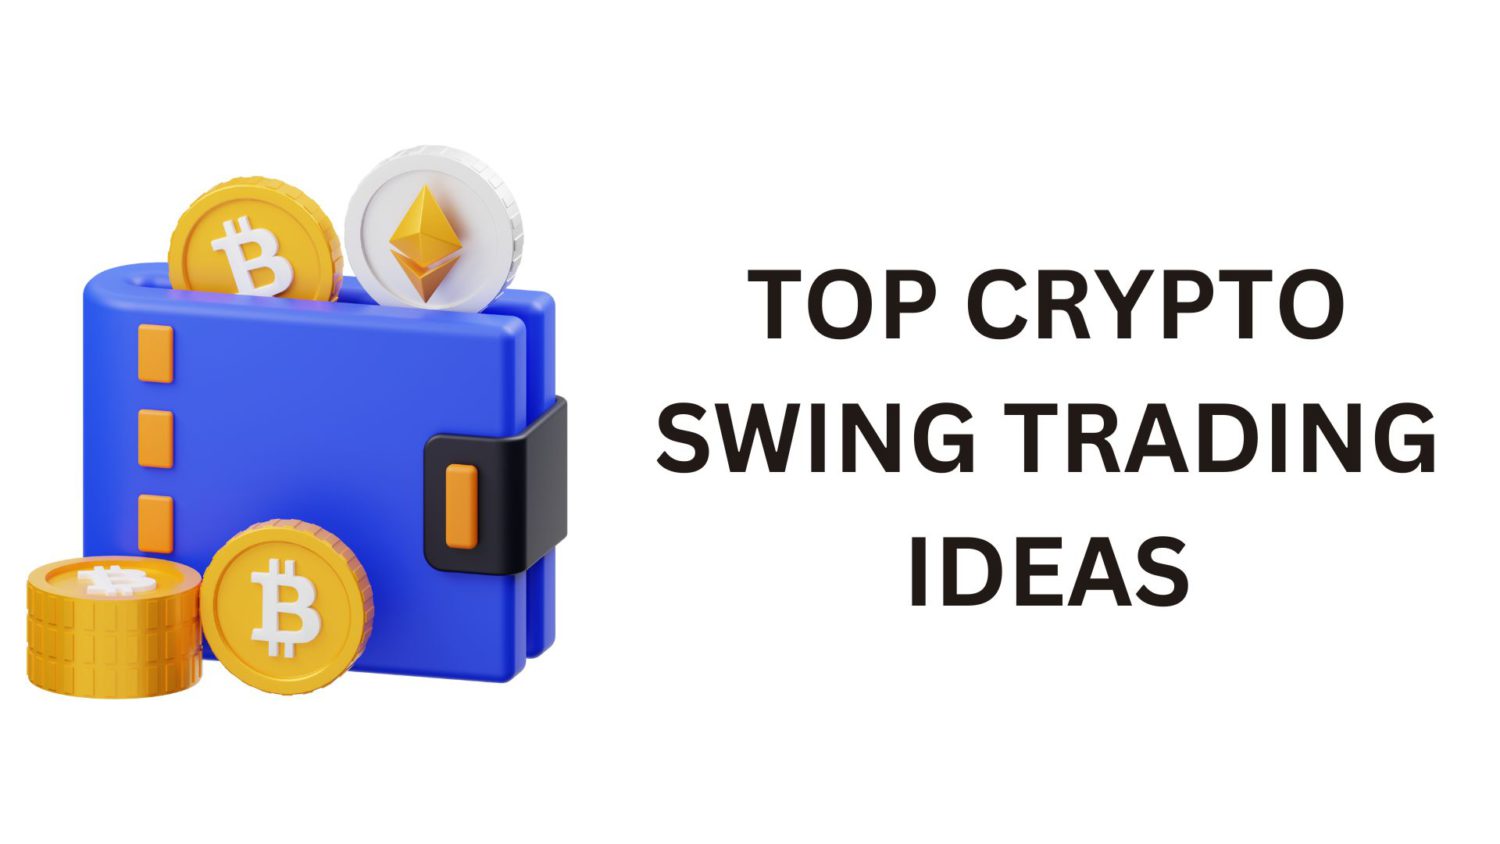 Top 3 Cryptos to Buy for Swing Trading for Maximum Gains - CoinCodeCap